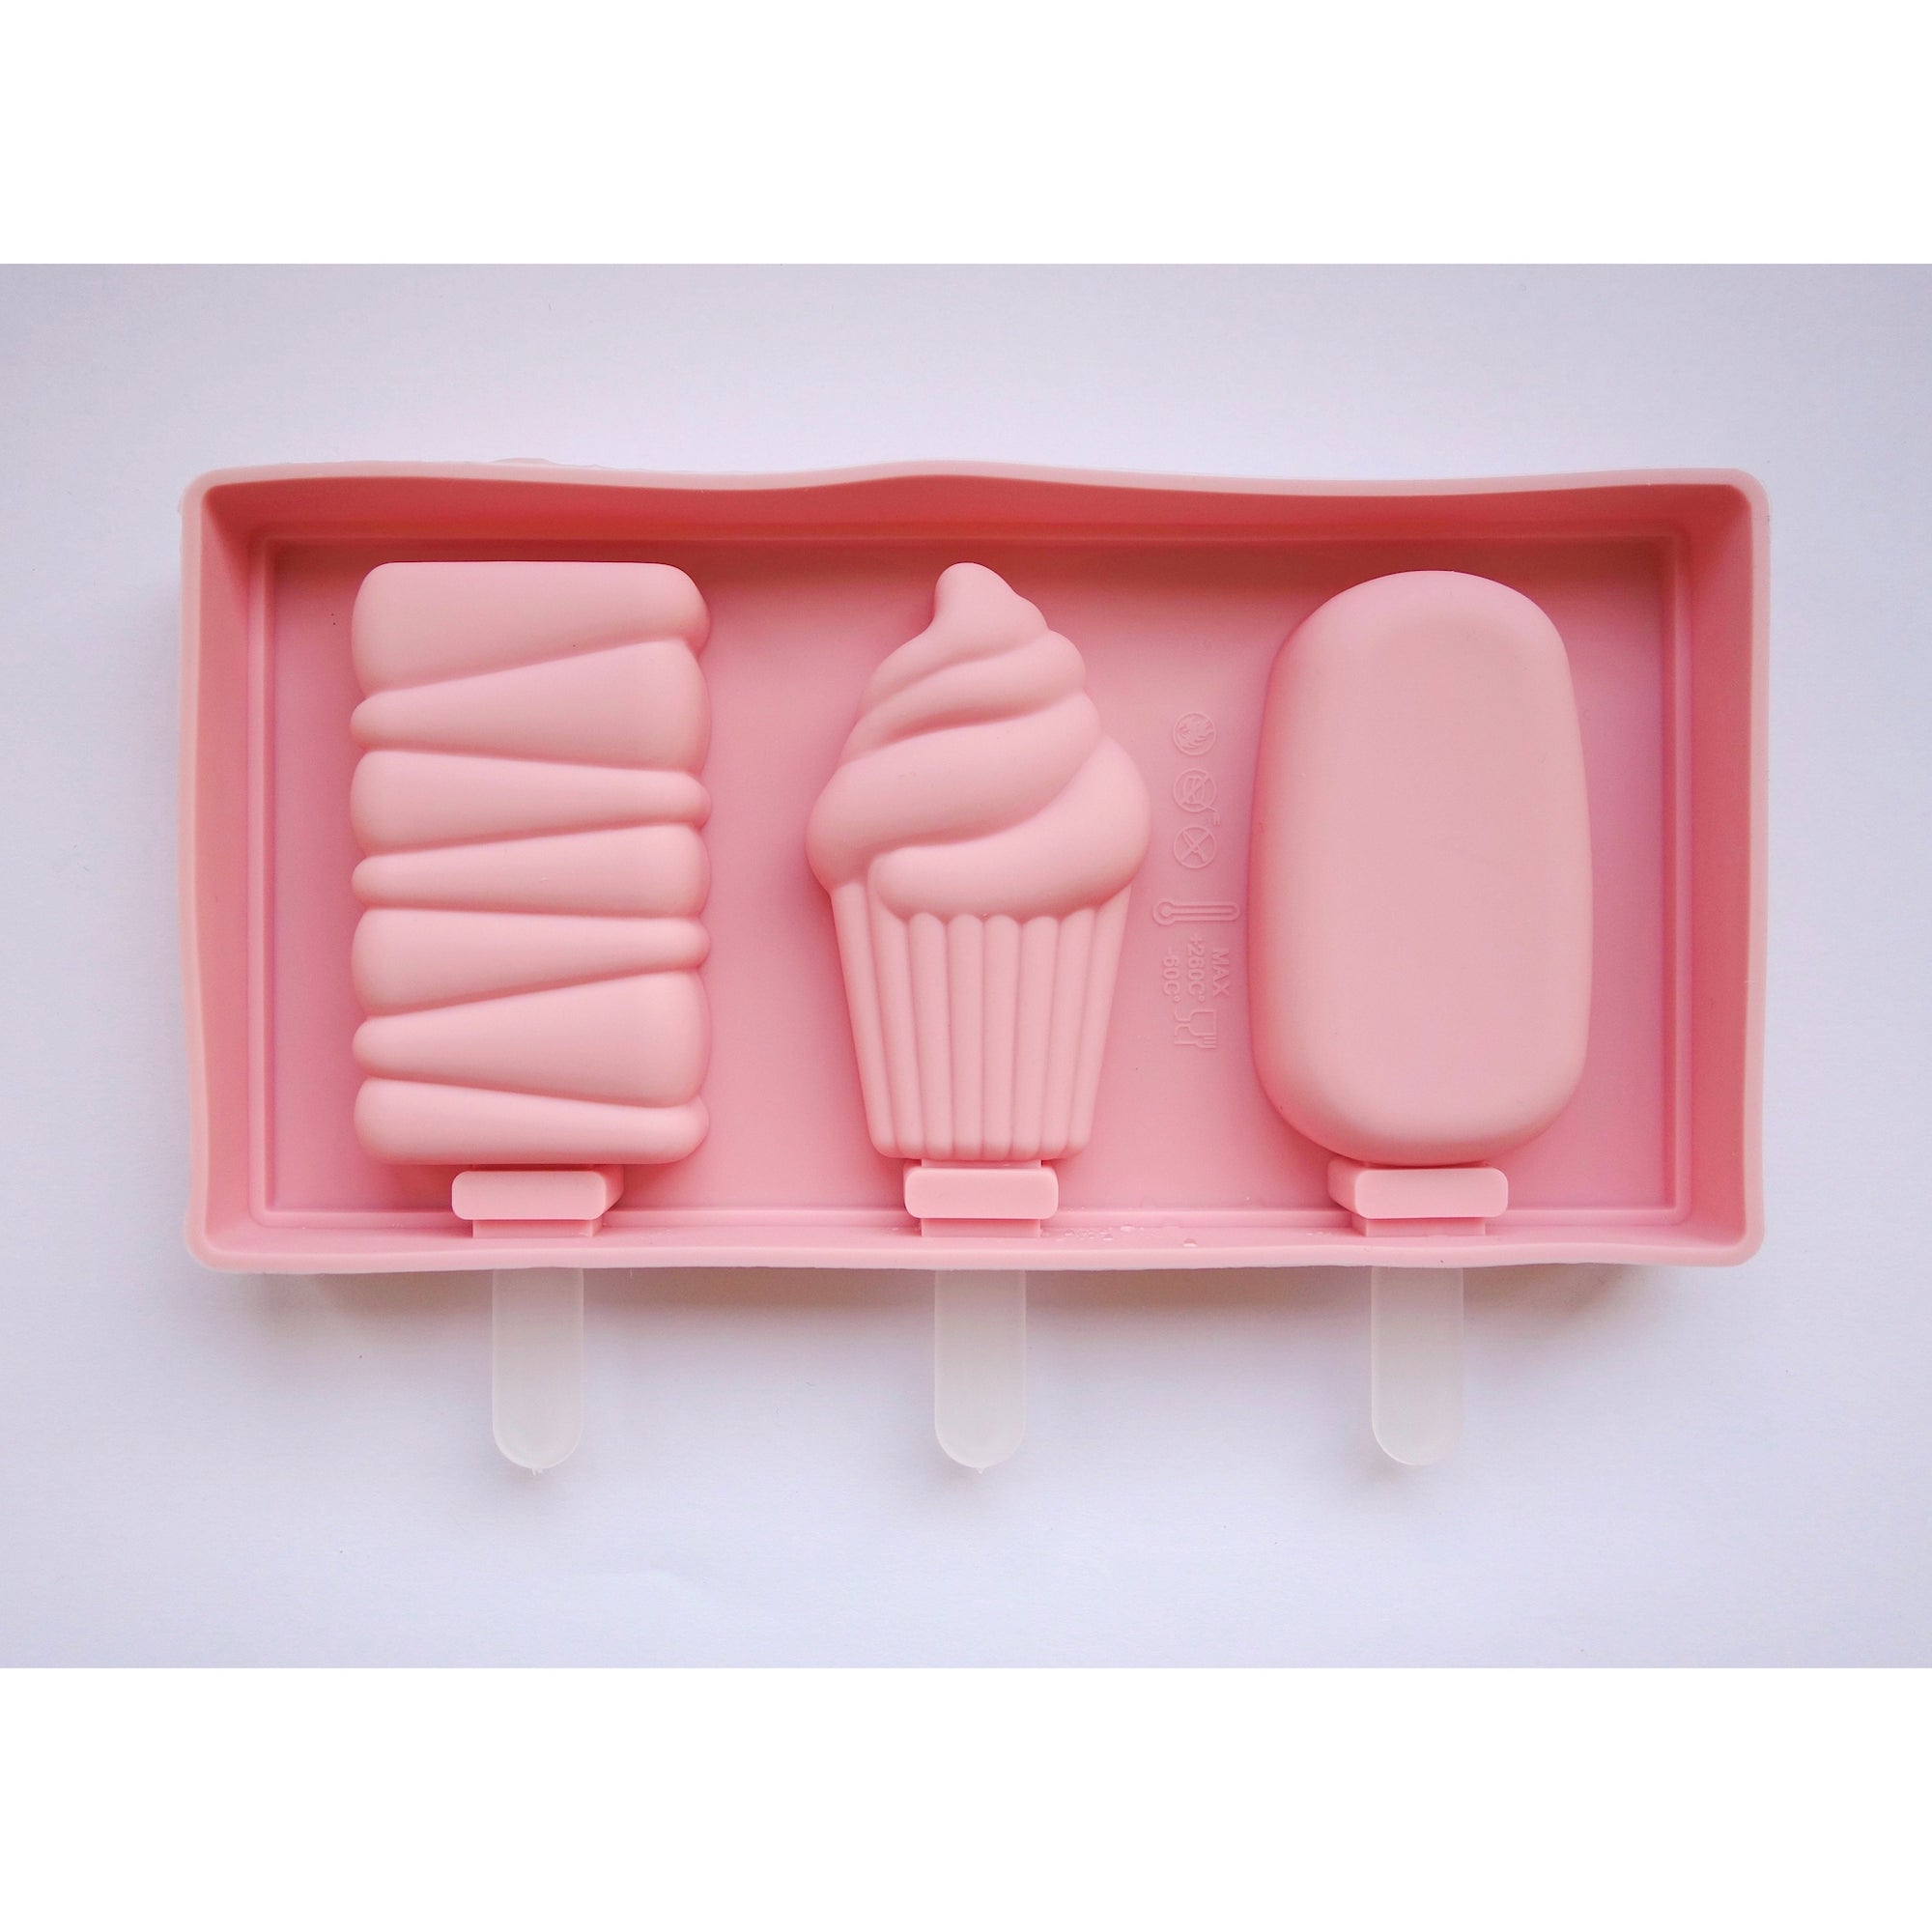 Silicone Mold for Cakesicles, Donut - 4 Cavity